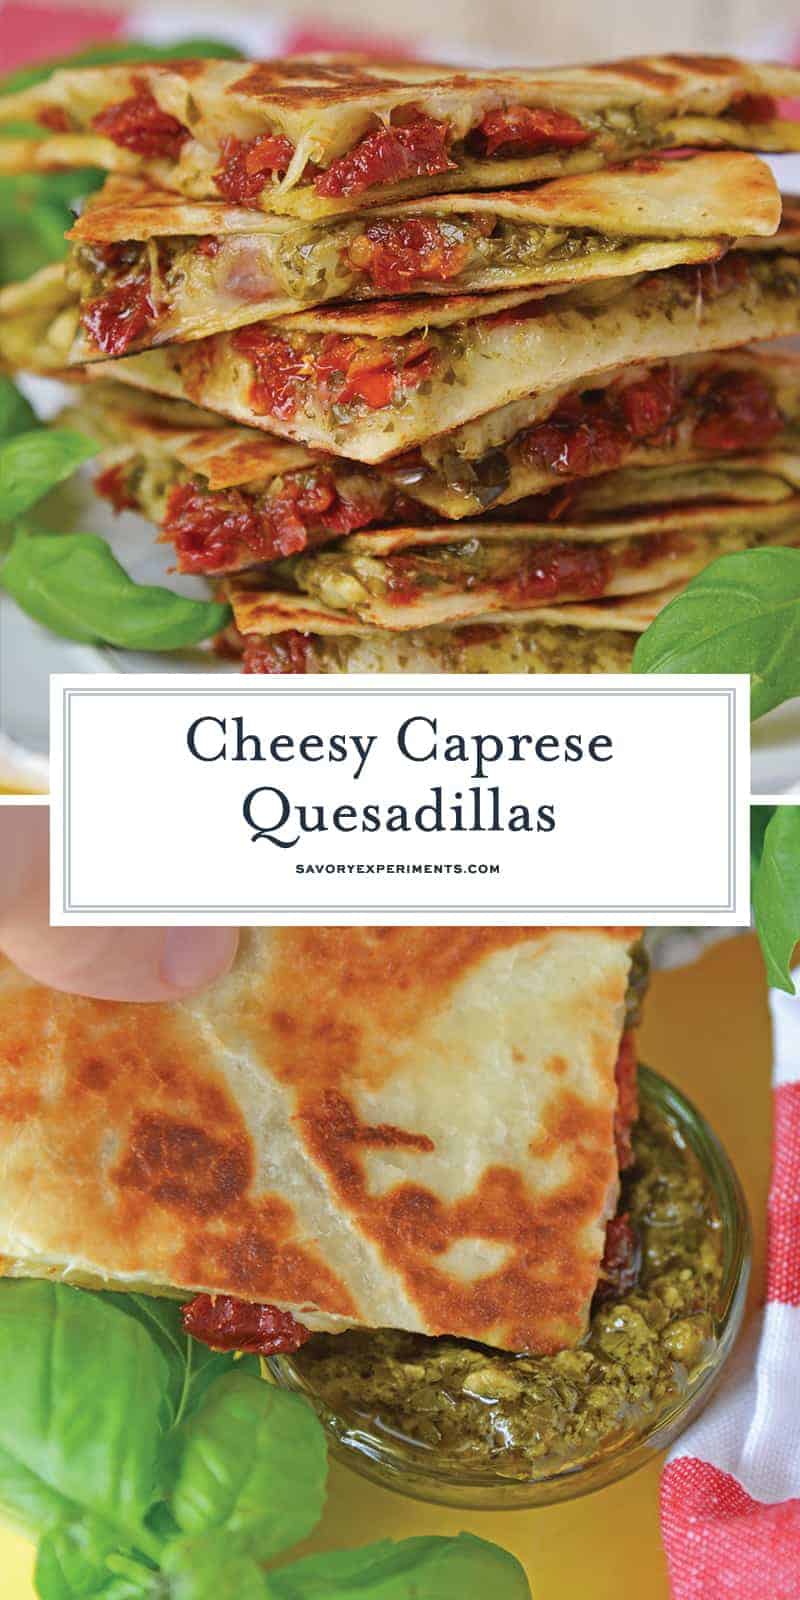 Caprese Quesadillas combine homemade pesto sauce with sun dried tomatoes and gooey mozzarella cheese. Serve for lunch, dinner or even as a party appetizer! #quesadillarecipe #capresequesadilla www.savoryexperiments.com 